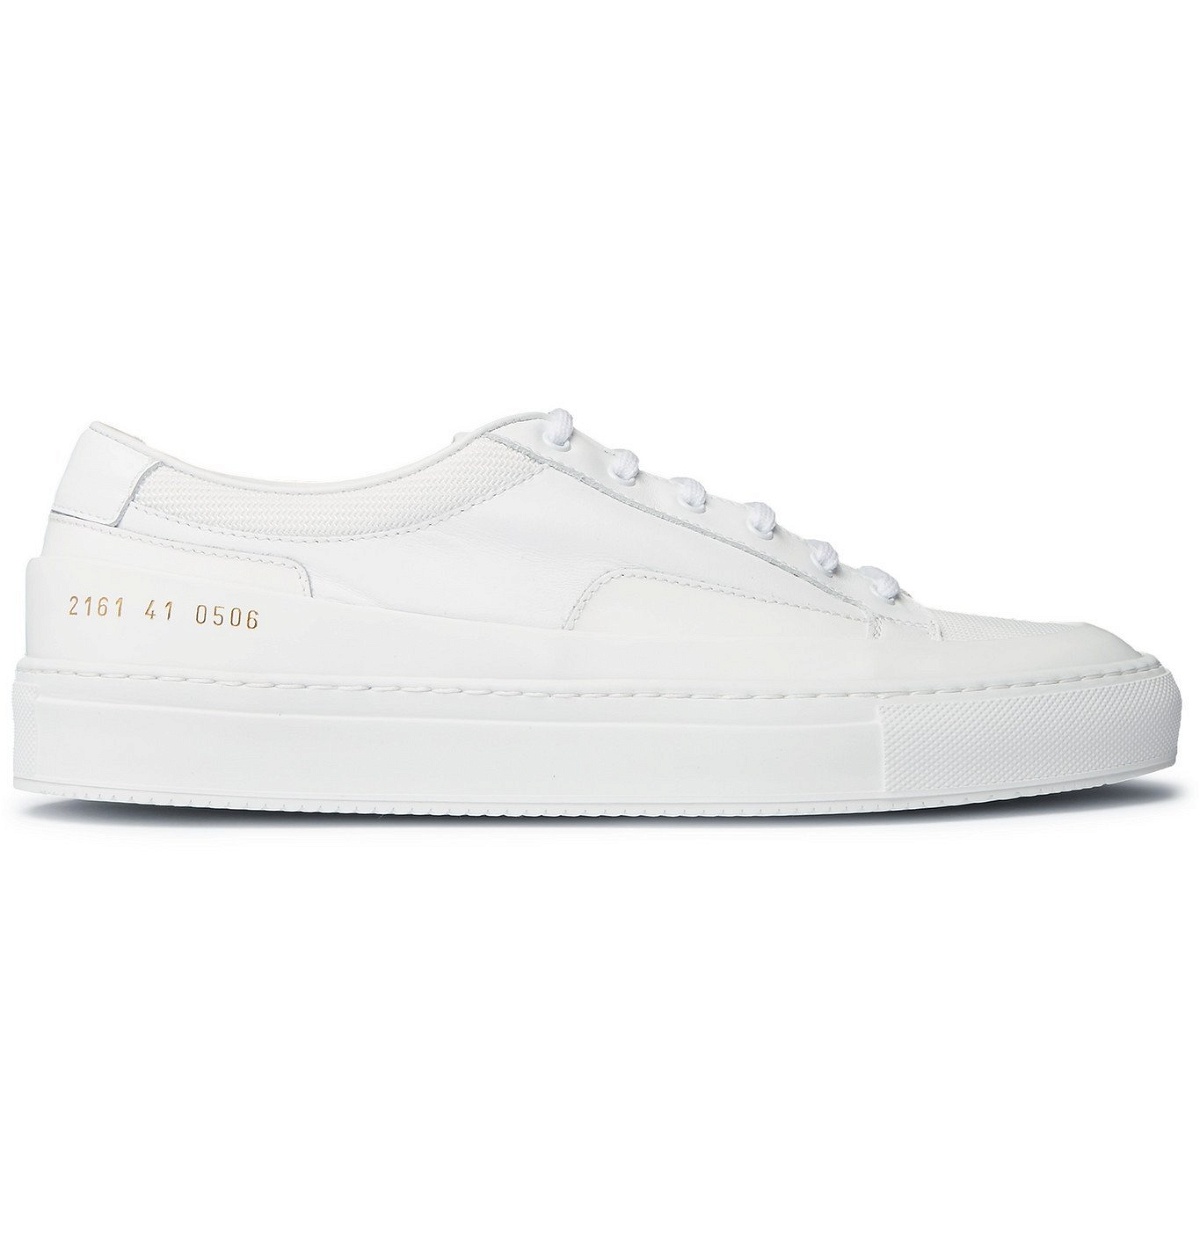 Common Projects - Retro Low Leather Sneakers - White Common Projects